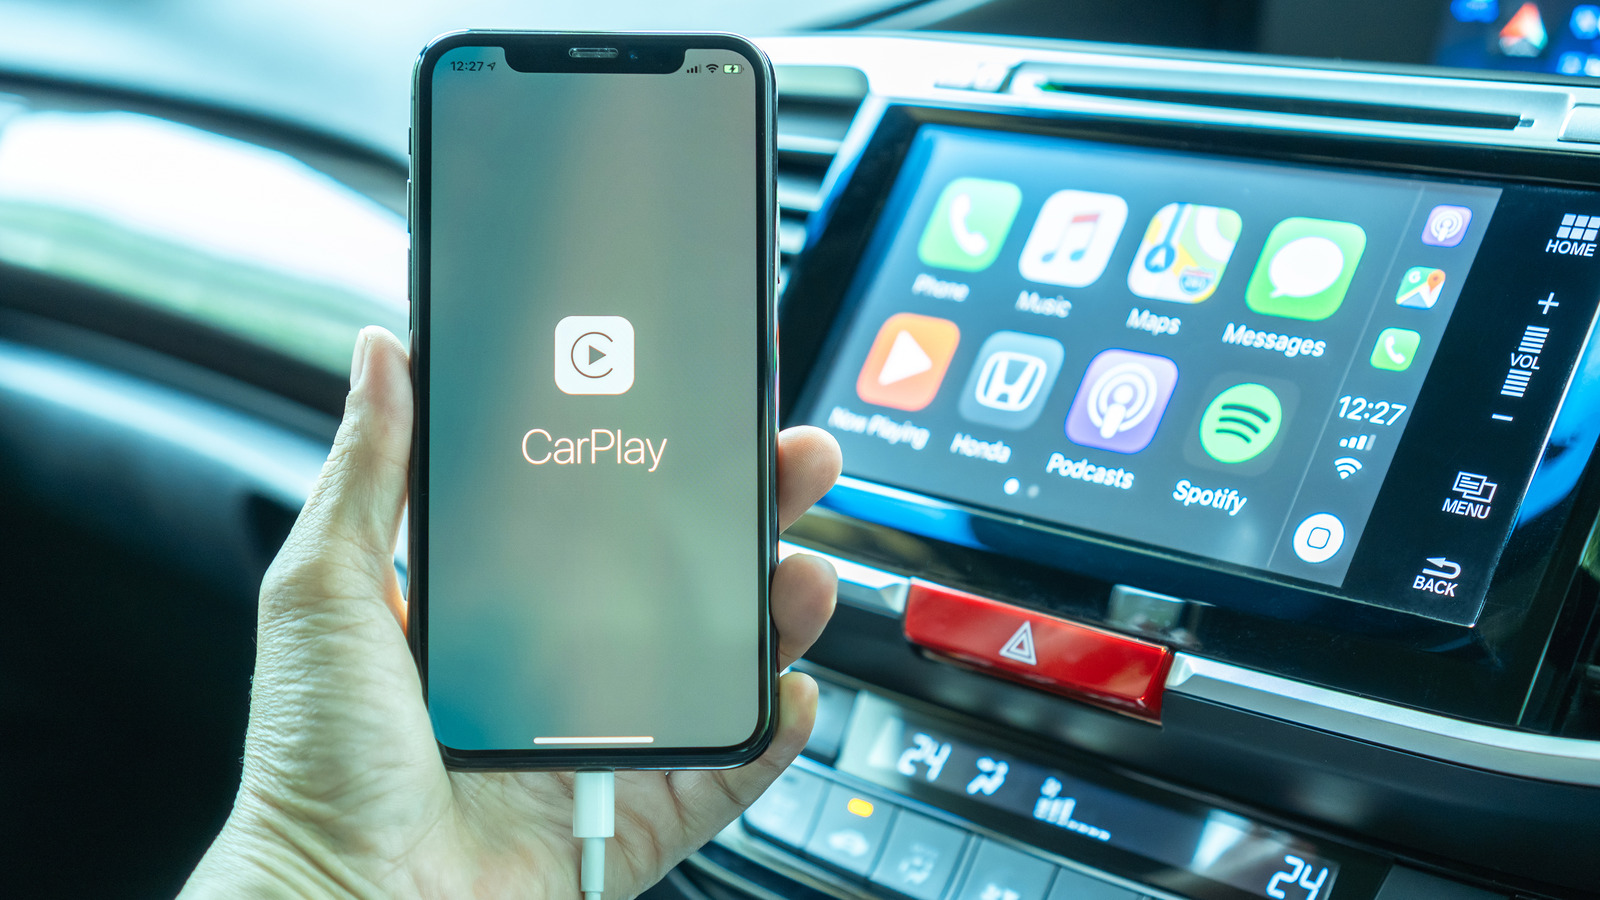 Uograde your car with the best CarPlay adapter available! The